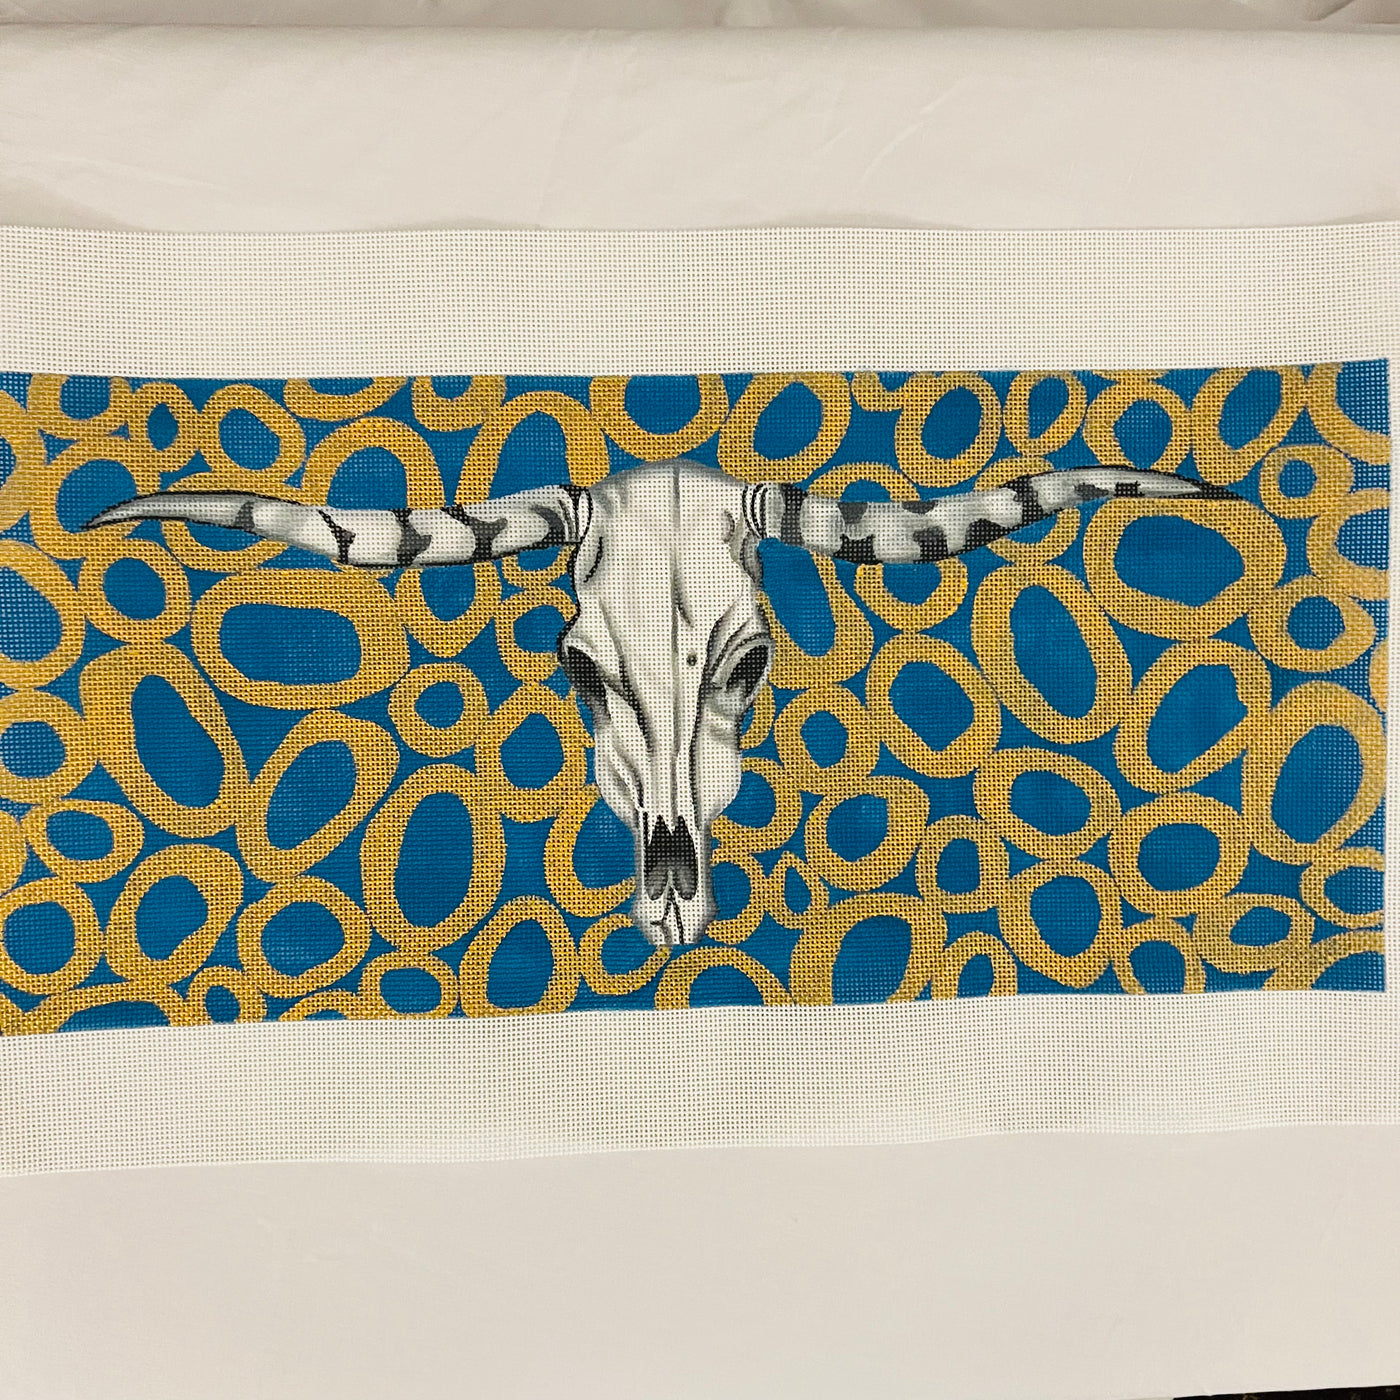 Longhorn Skull on Gold and Teal Needlepoint Canvas